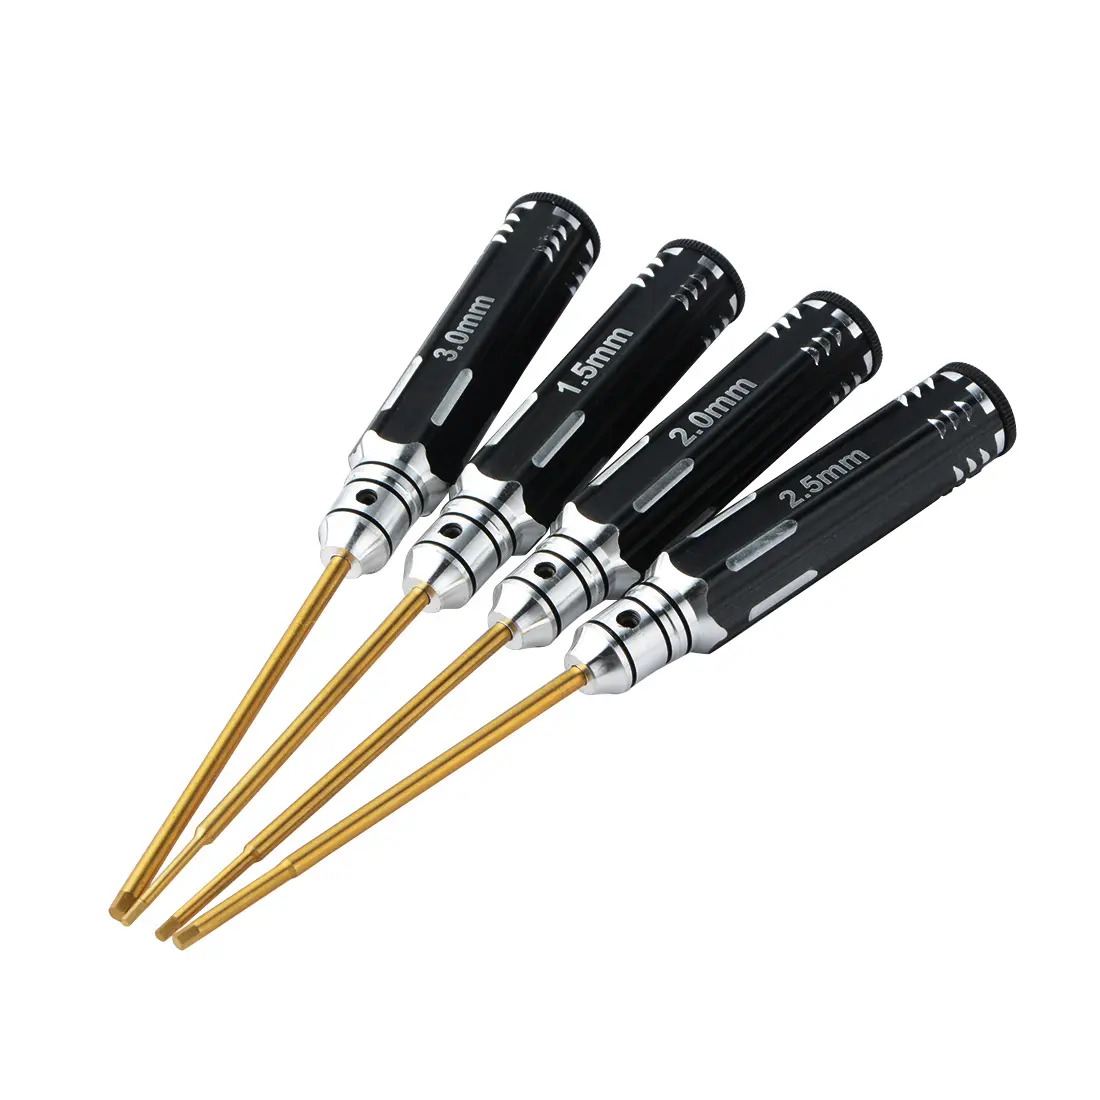 4 In 1 Screwdriver Hexagon Head 1.5 2.0 2.5 3.0mm Hex Screw Driver Tools Set Professional RC Tools Kits For FPV Helicopter Car